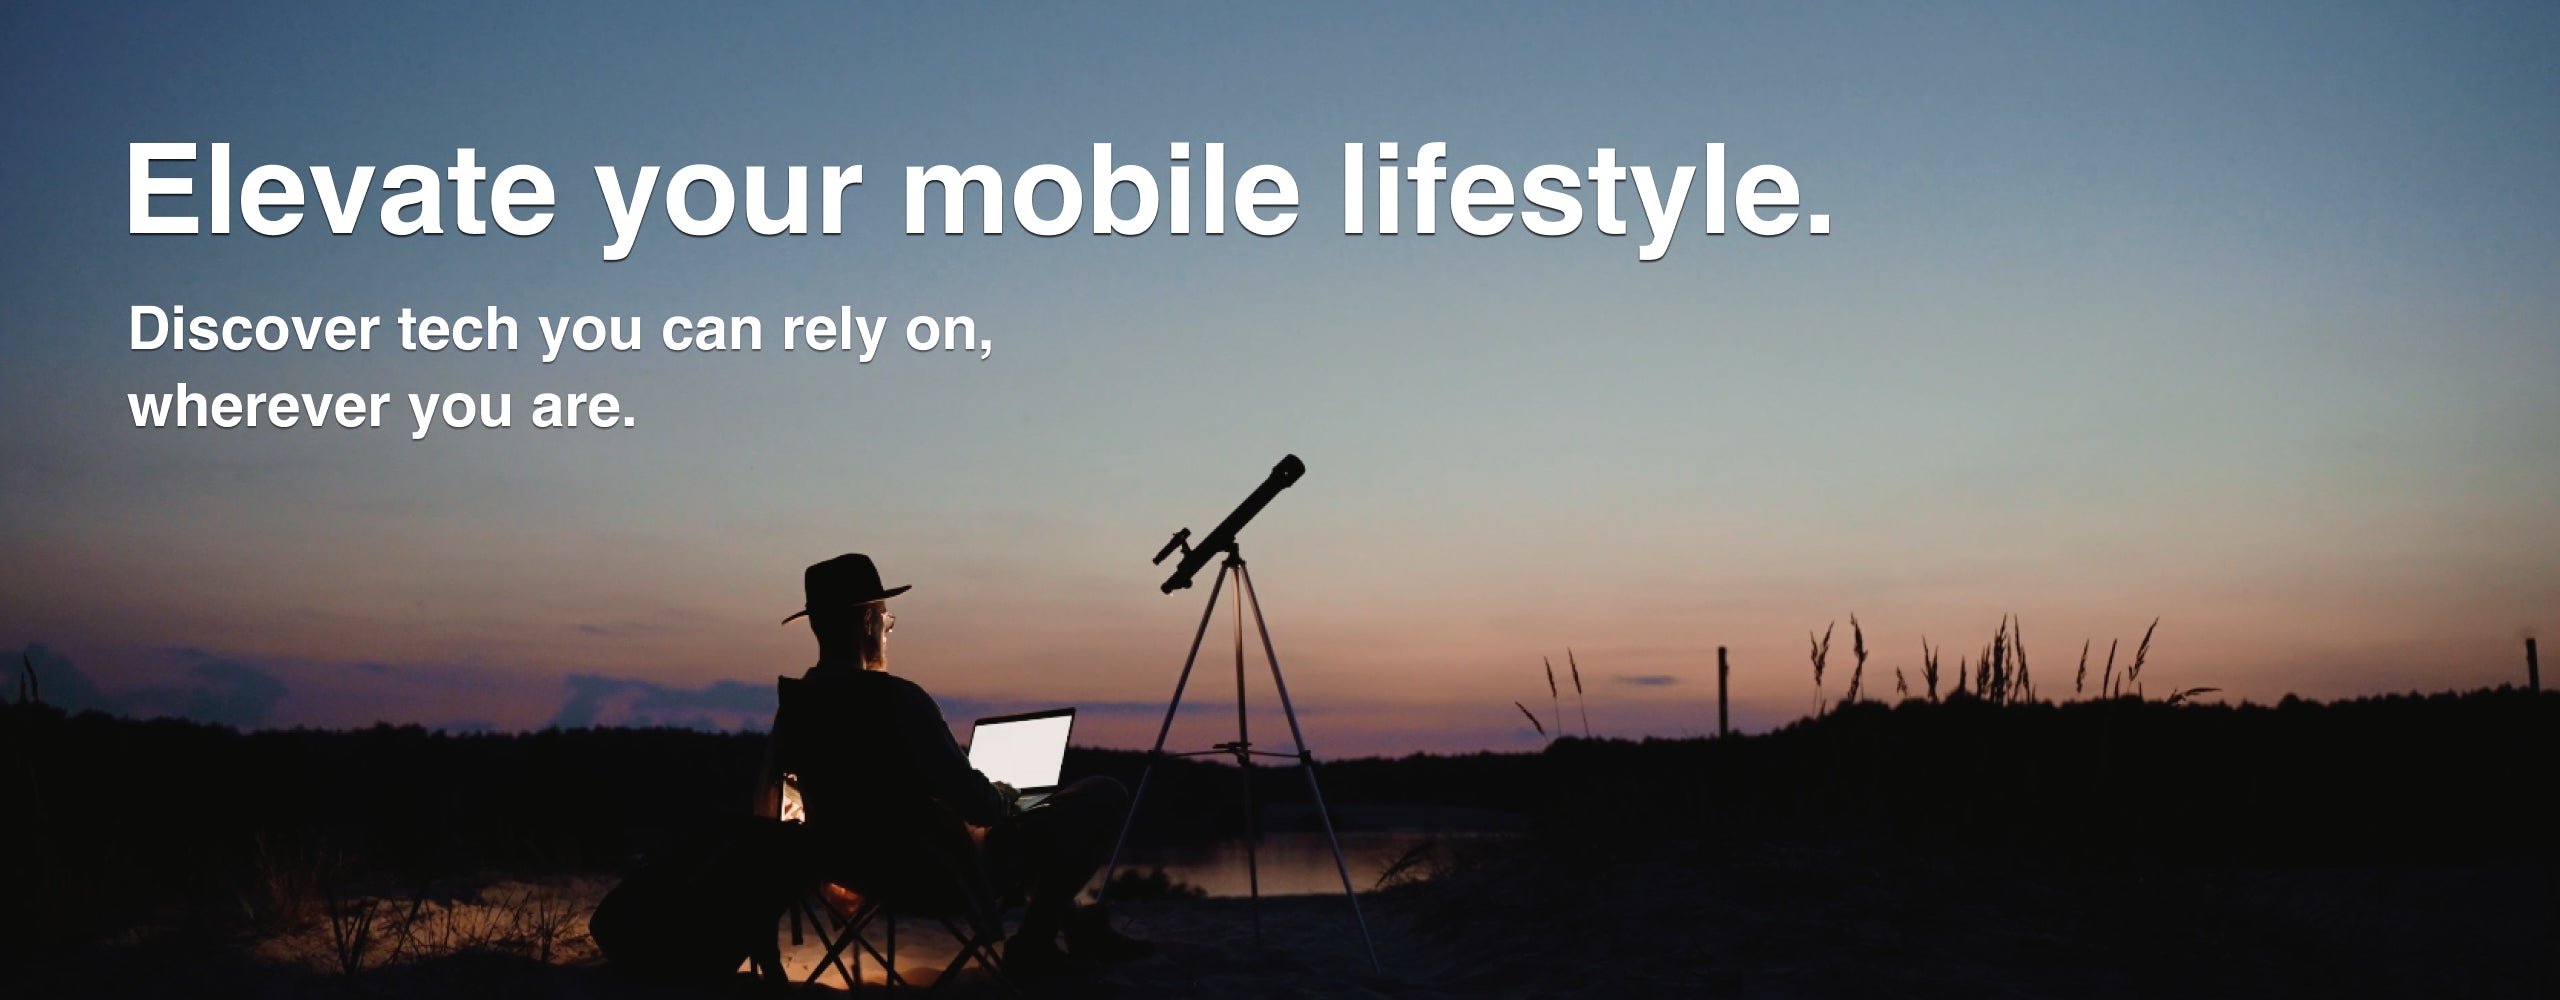 Elevate your mobile lifestyle. Discover tech you can rely on, wherever you are. Shop now.